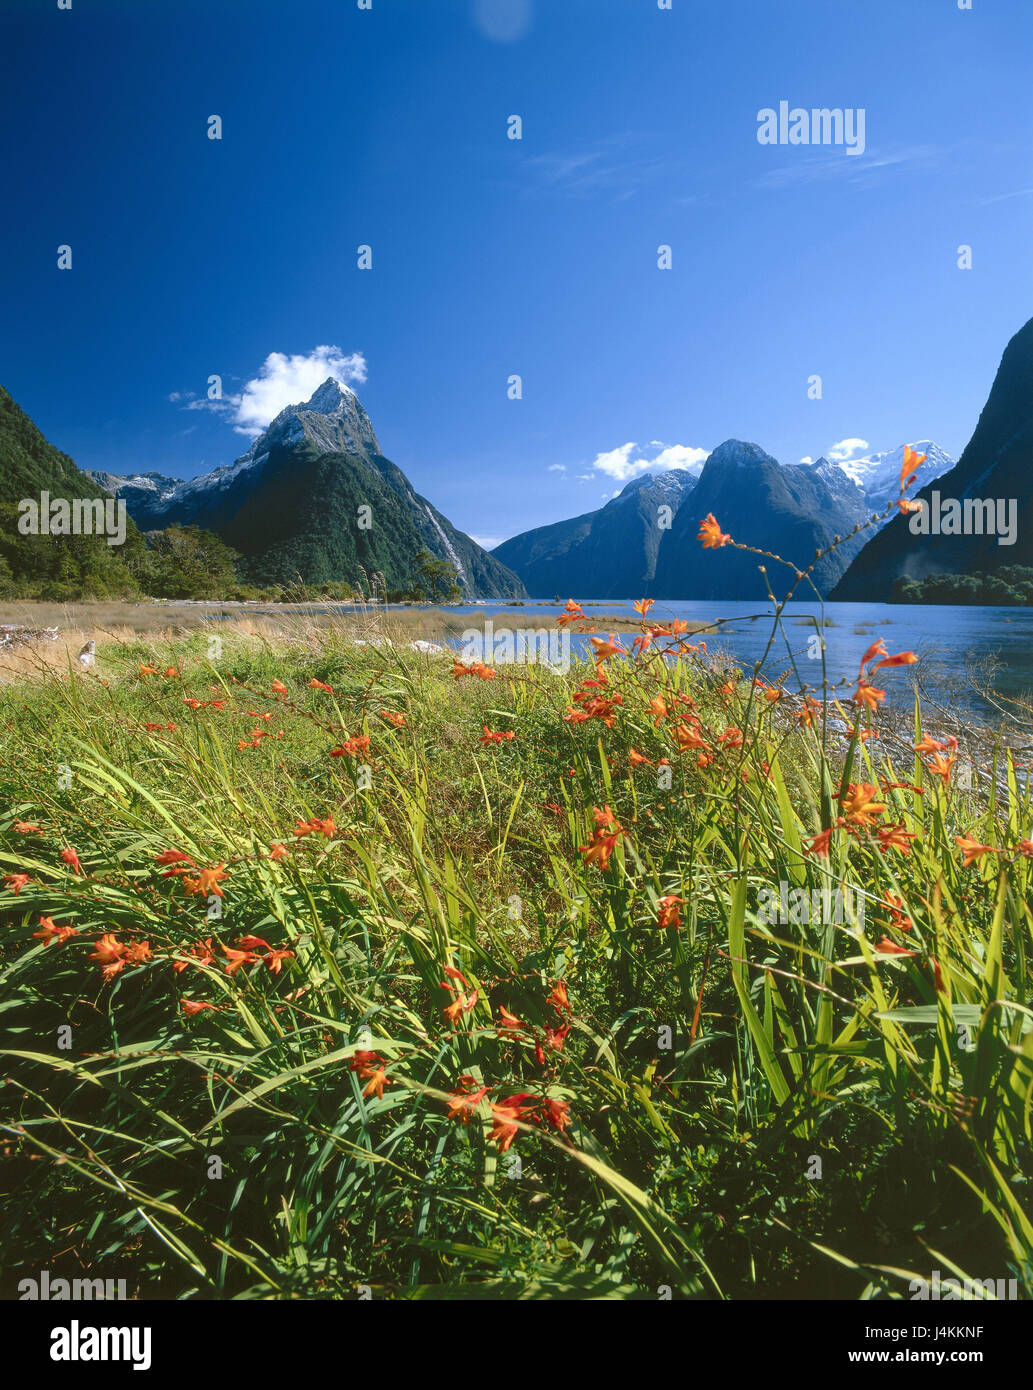 New Zealand, south island, fjord country national park, Mitre Peak, shore, vegetation New Zealand, mountain landscape, mountain, mountains, coast, fjord, lakeside, plants, flowers, nature destination, place of interest, rest, silence, Idyll Stock Photo